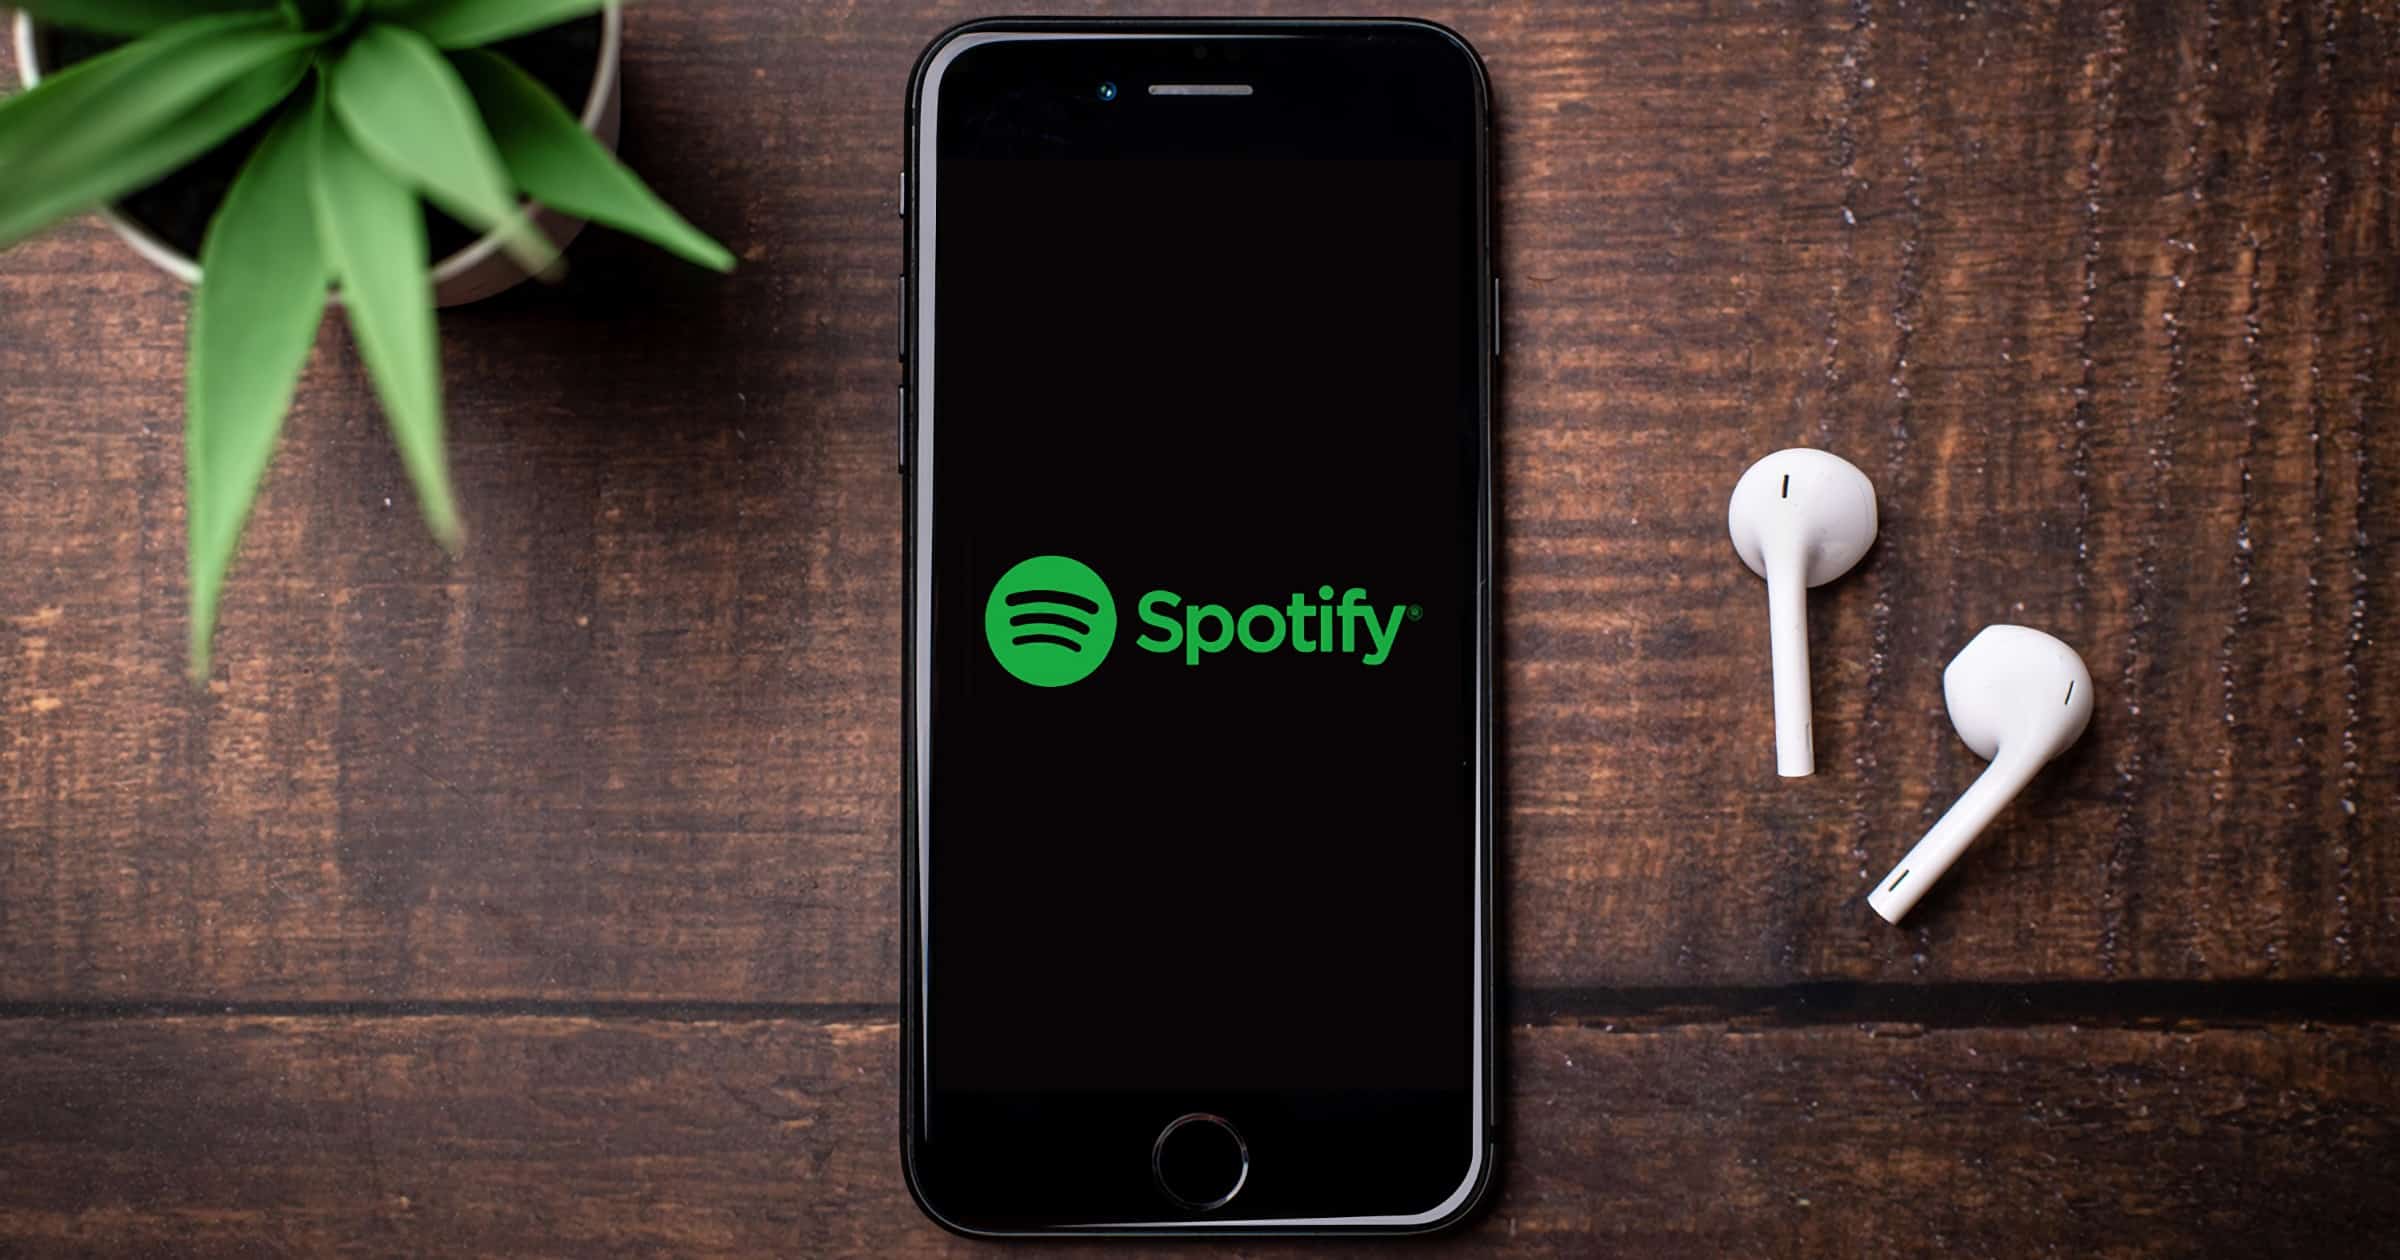 iPhone on a table with airpods and the Spotify logo.